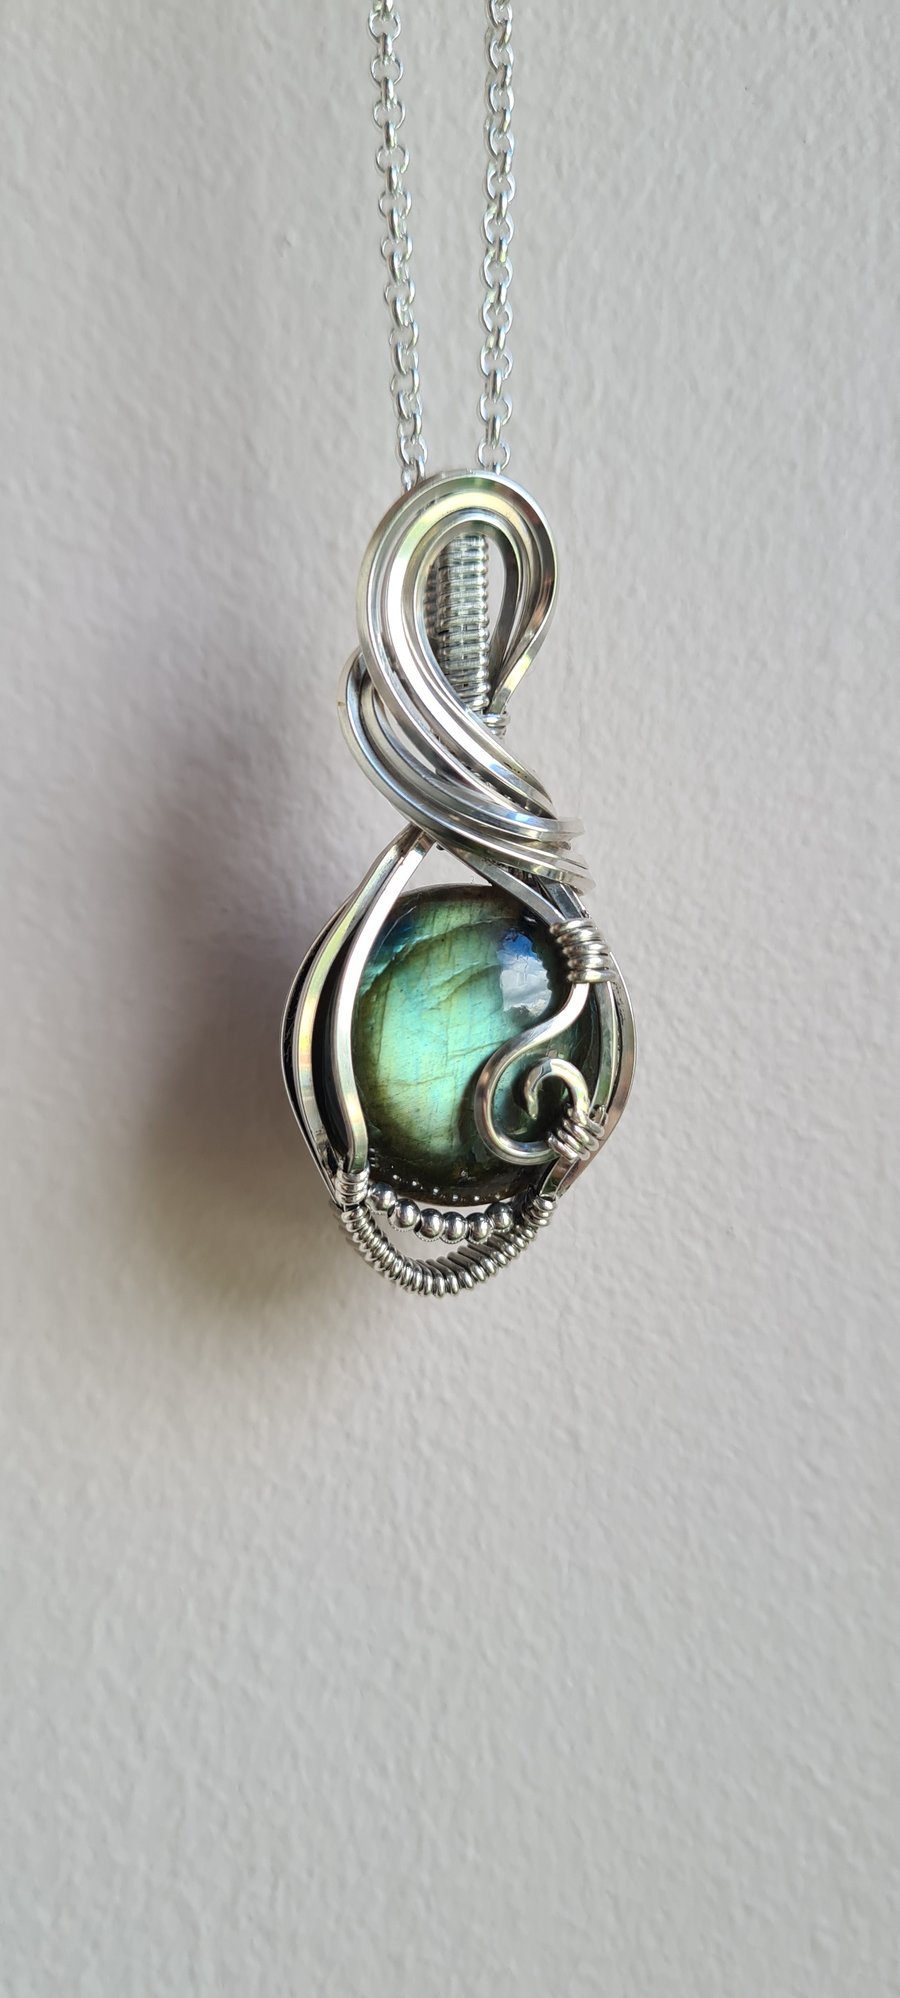 Handmade 925 Silver & Natural Labradorite Necklace Pendant Gift Boxed Jewellery